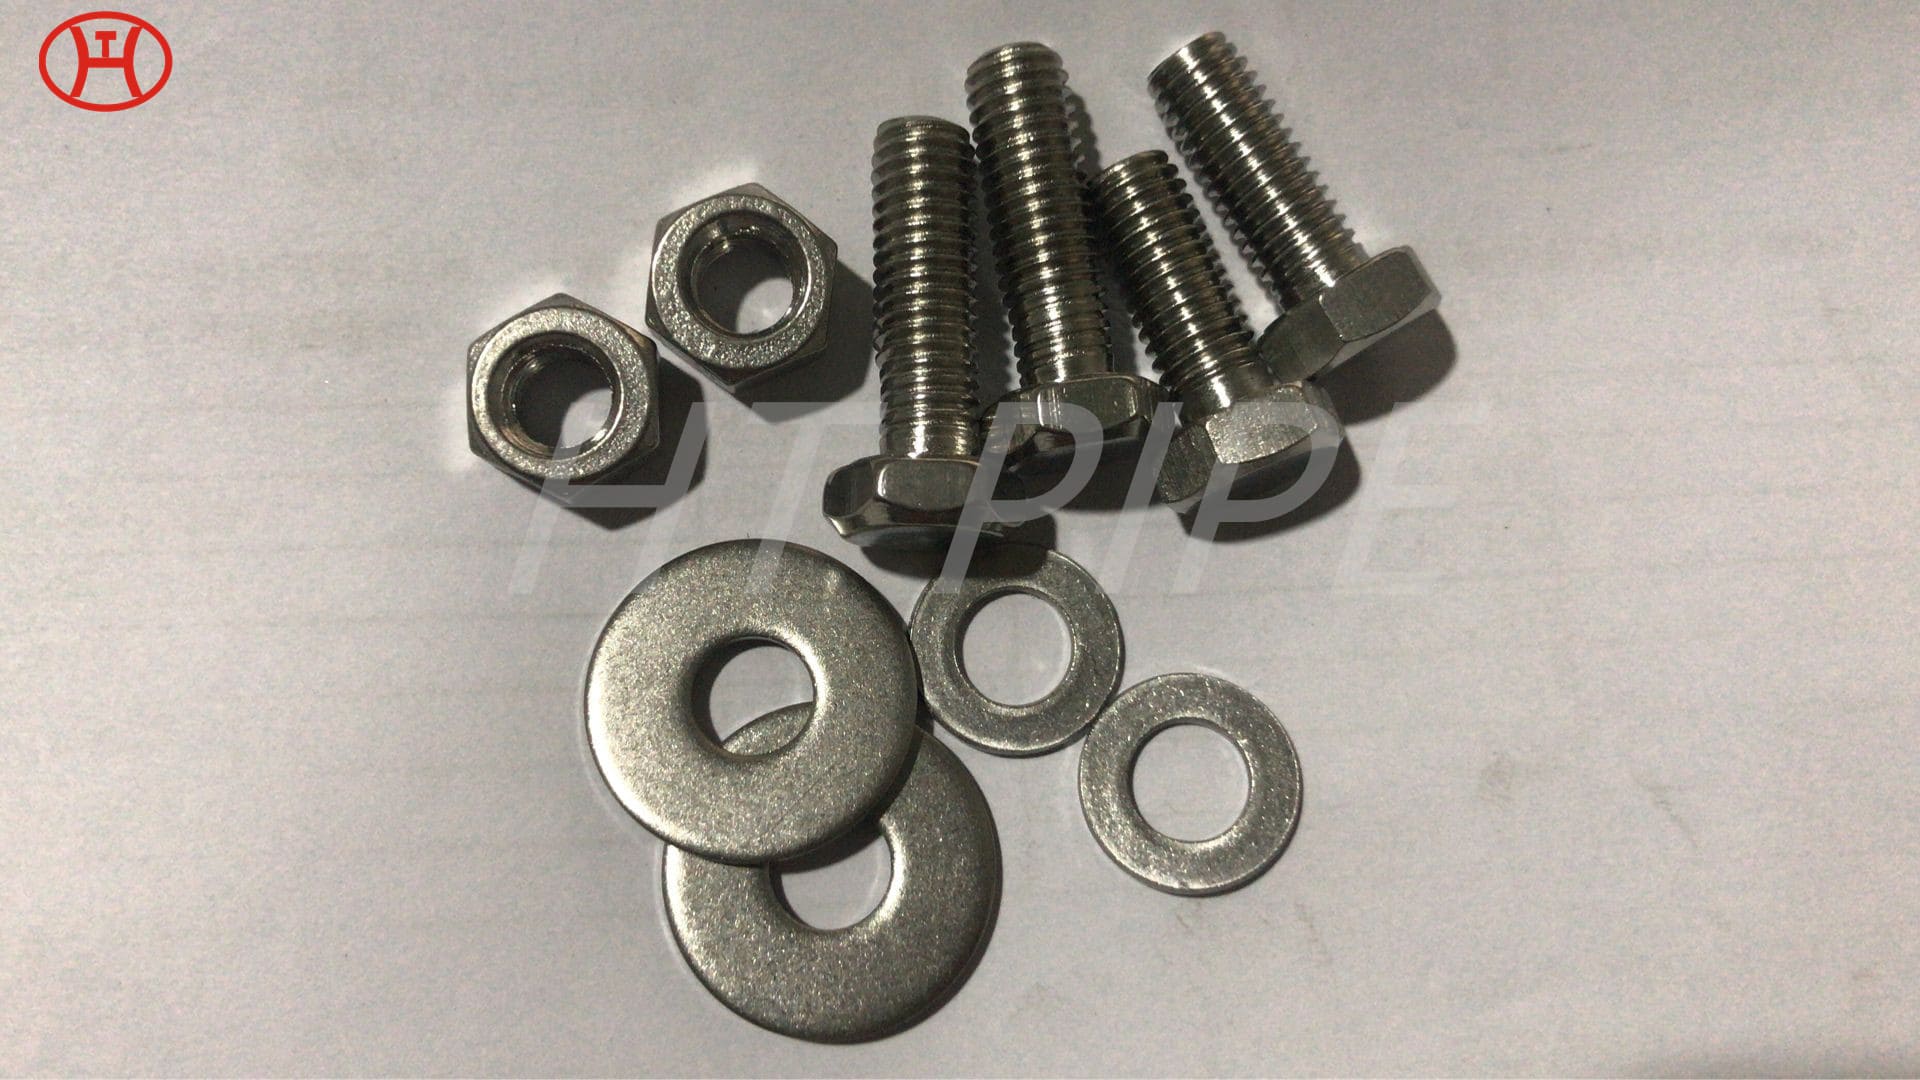 hastelloy c276 fasteners N10276 bolts screws nuts and washers